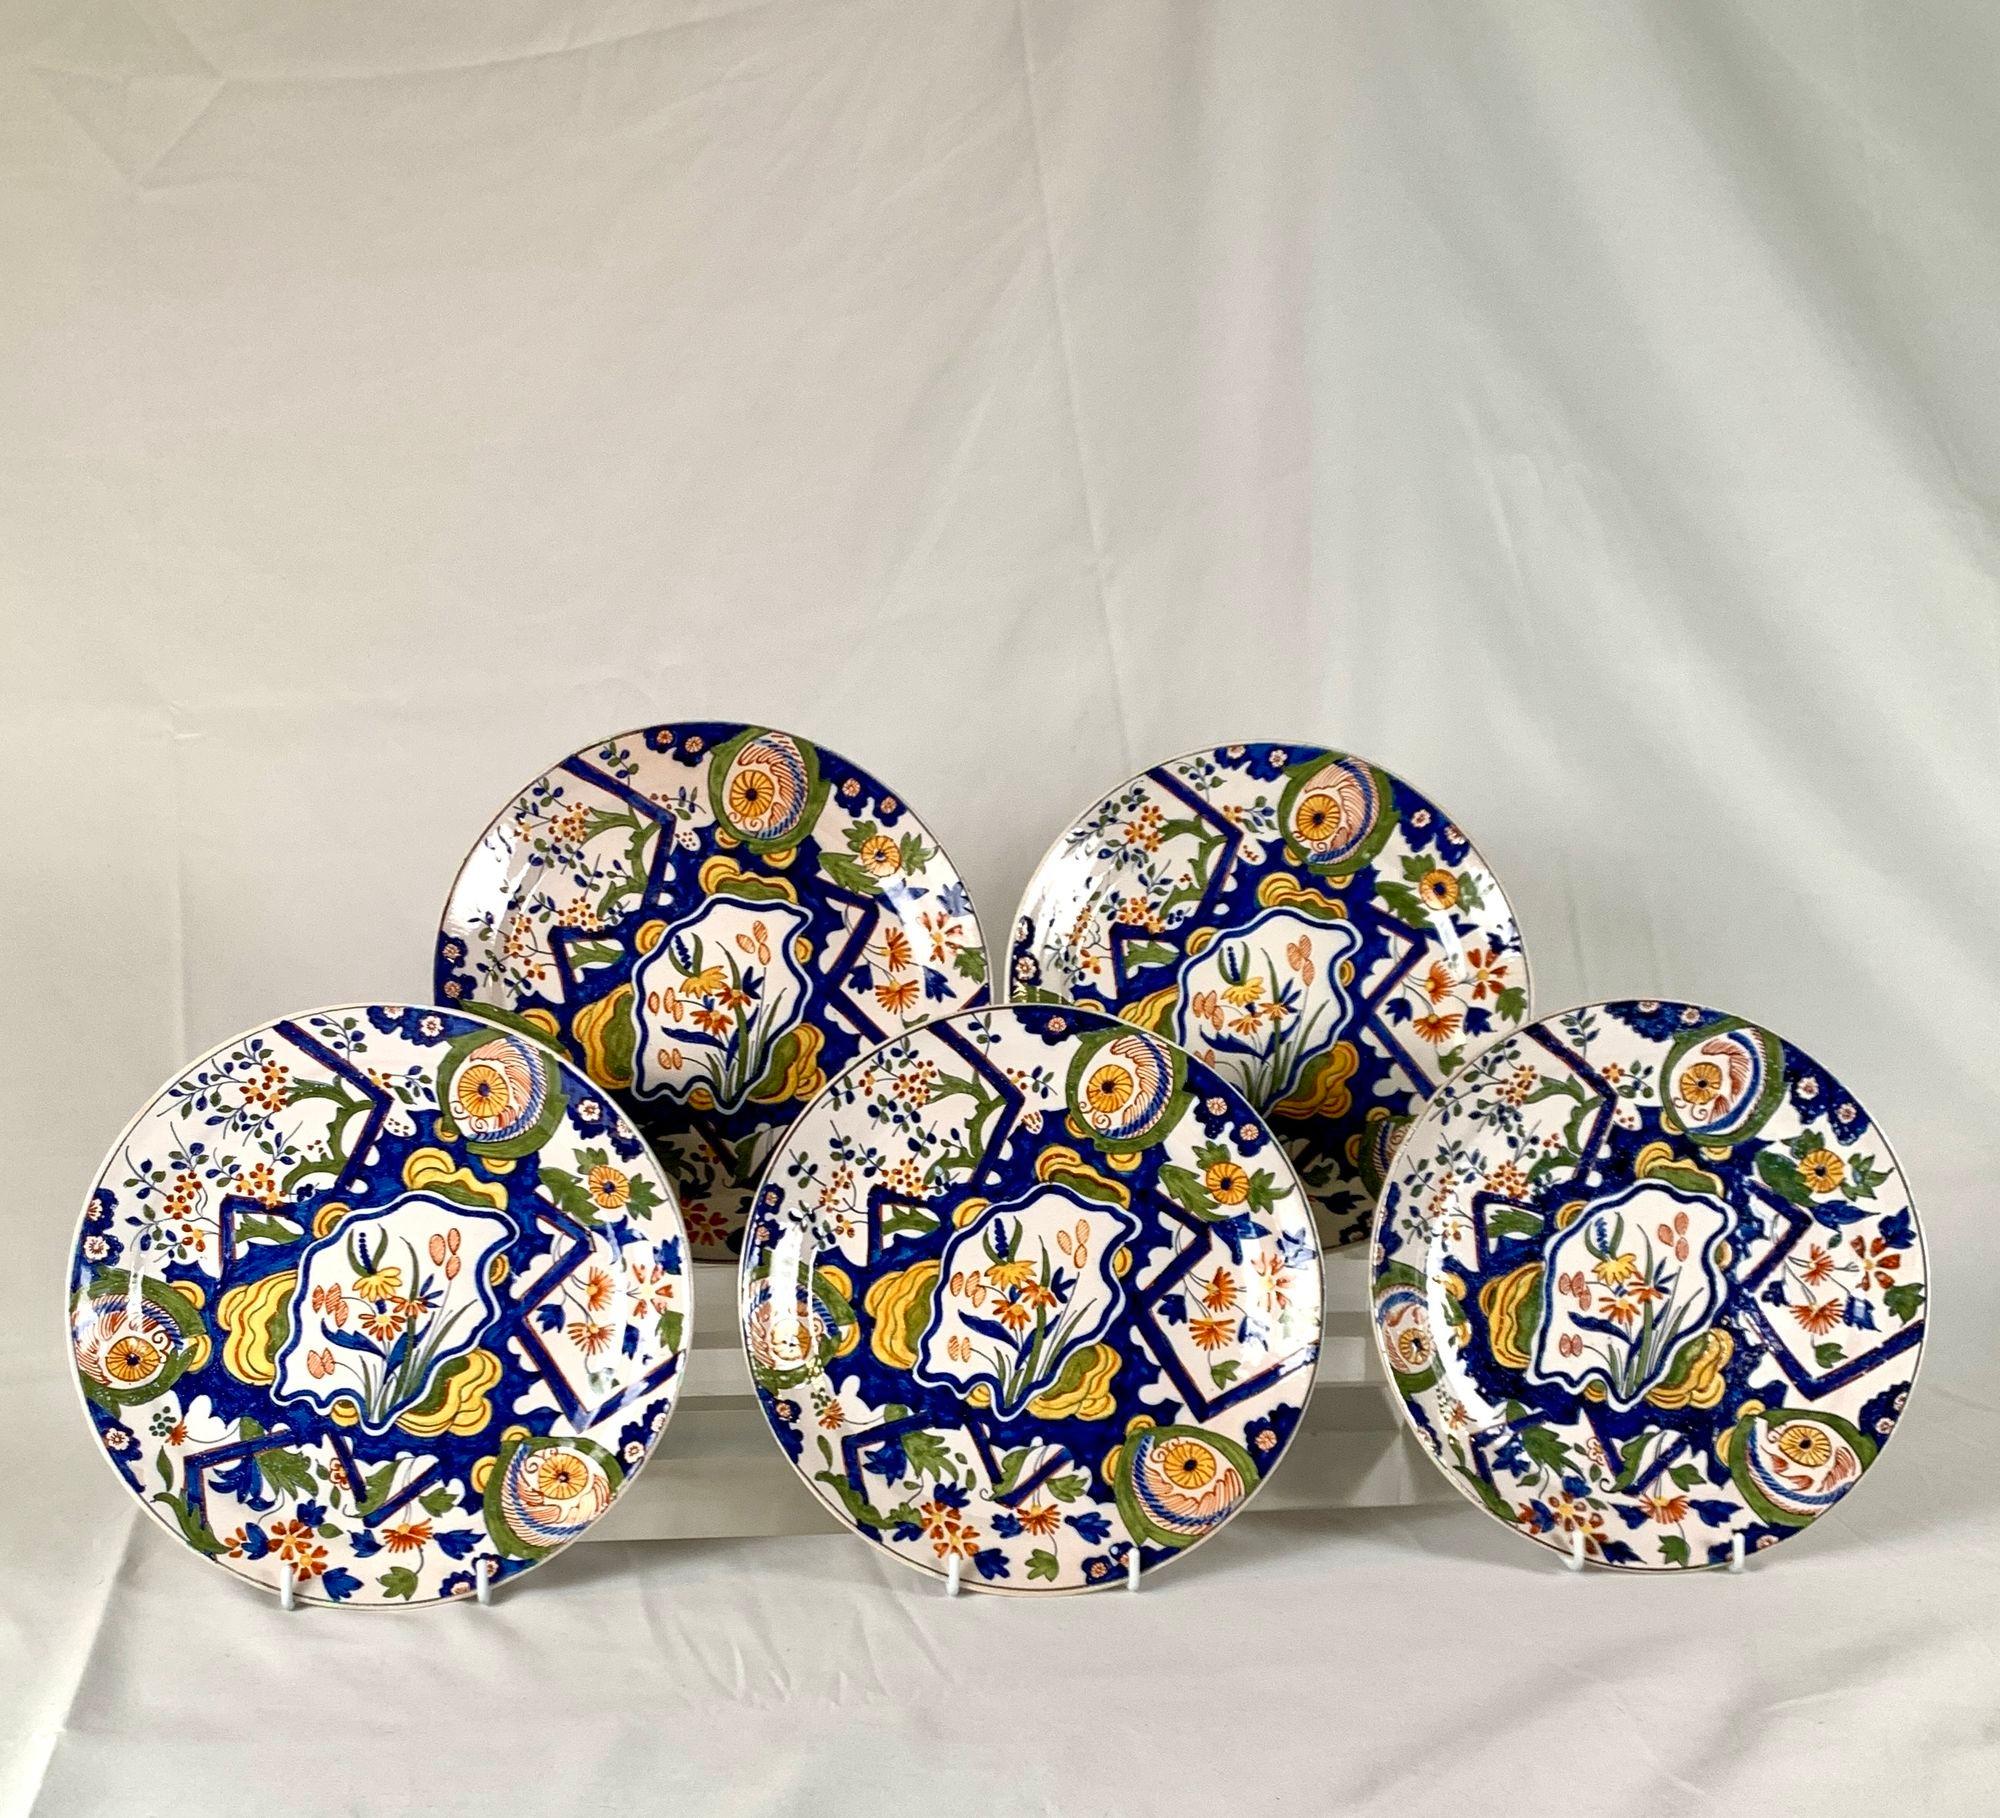 This set of plates has a zigzag pattern, one of the favorite decorations for upscale Dutch Delft in the 18th and 19th centuries.
The hand painted Bliksem 